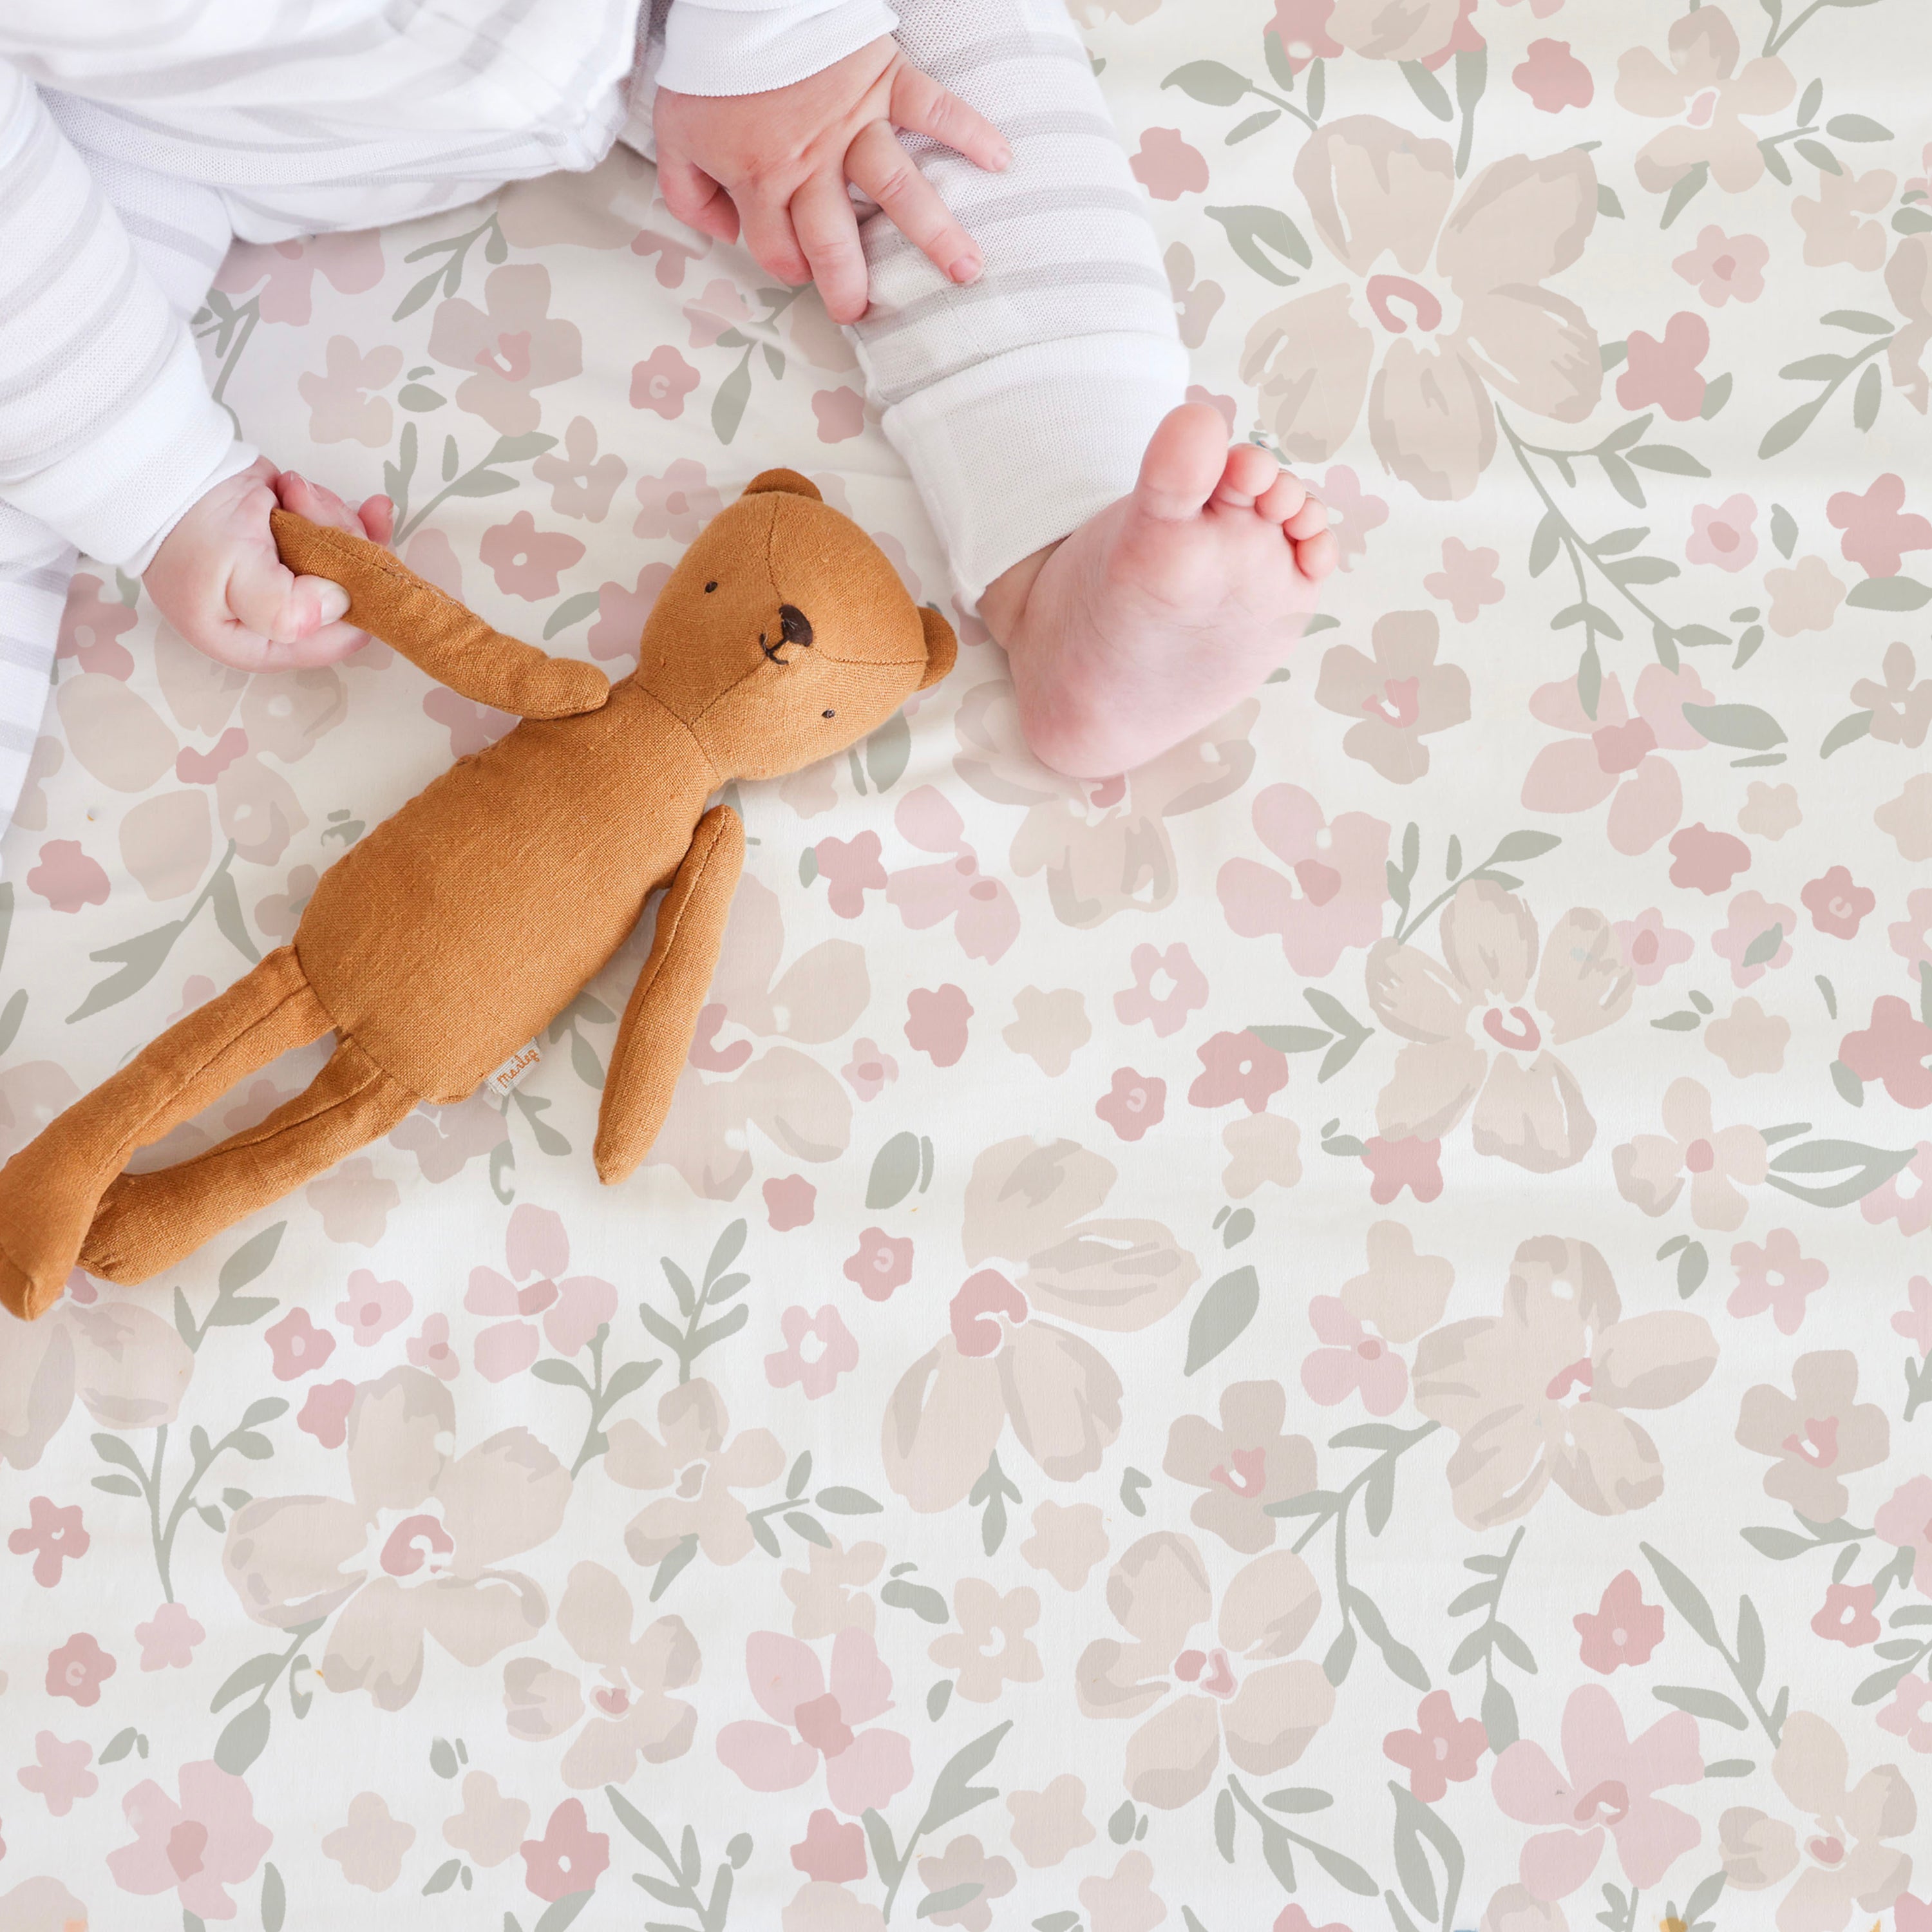 A baby's legs and arms are visible as they hold a Makemake Organics Blossom crib fitted sheet with pillowcase on a floral patterned blanket with soft pink and green colors.